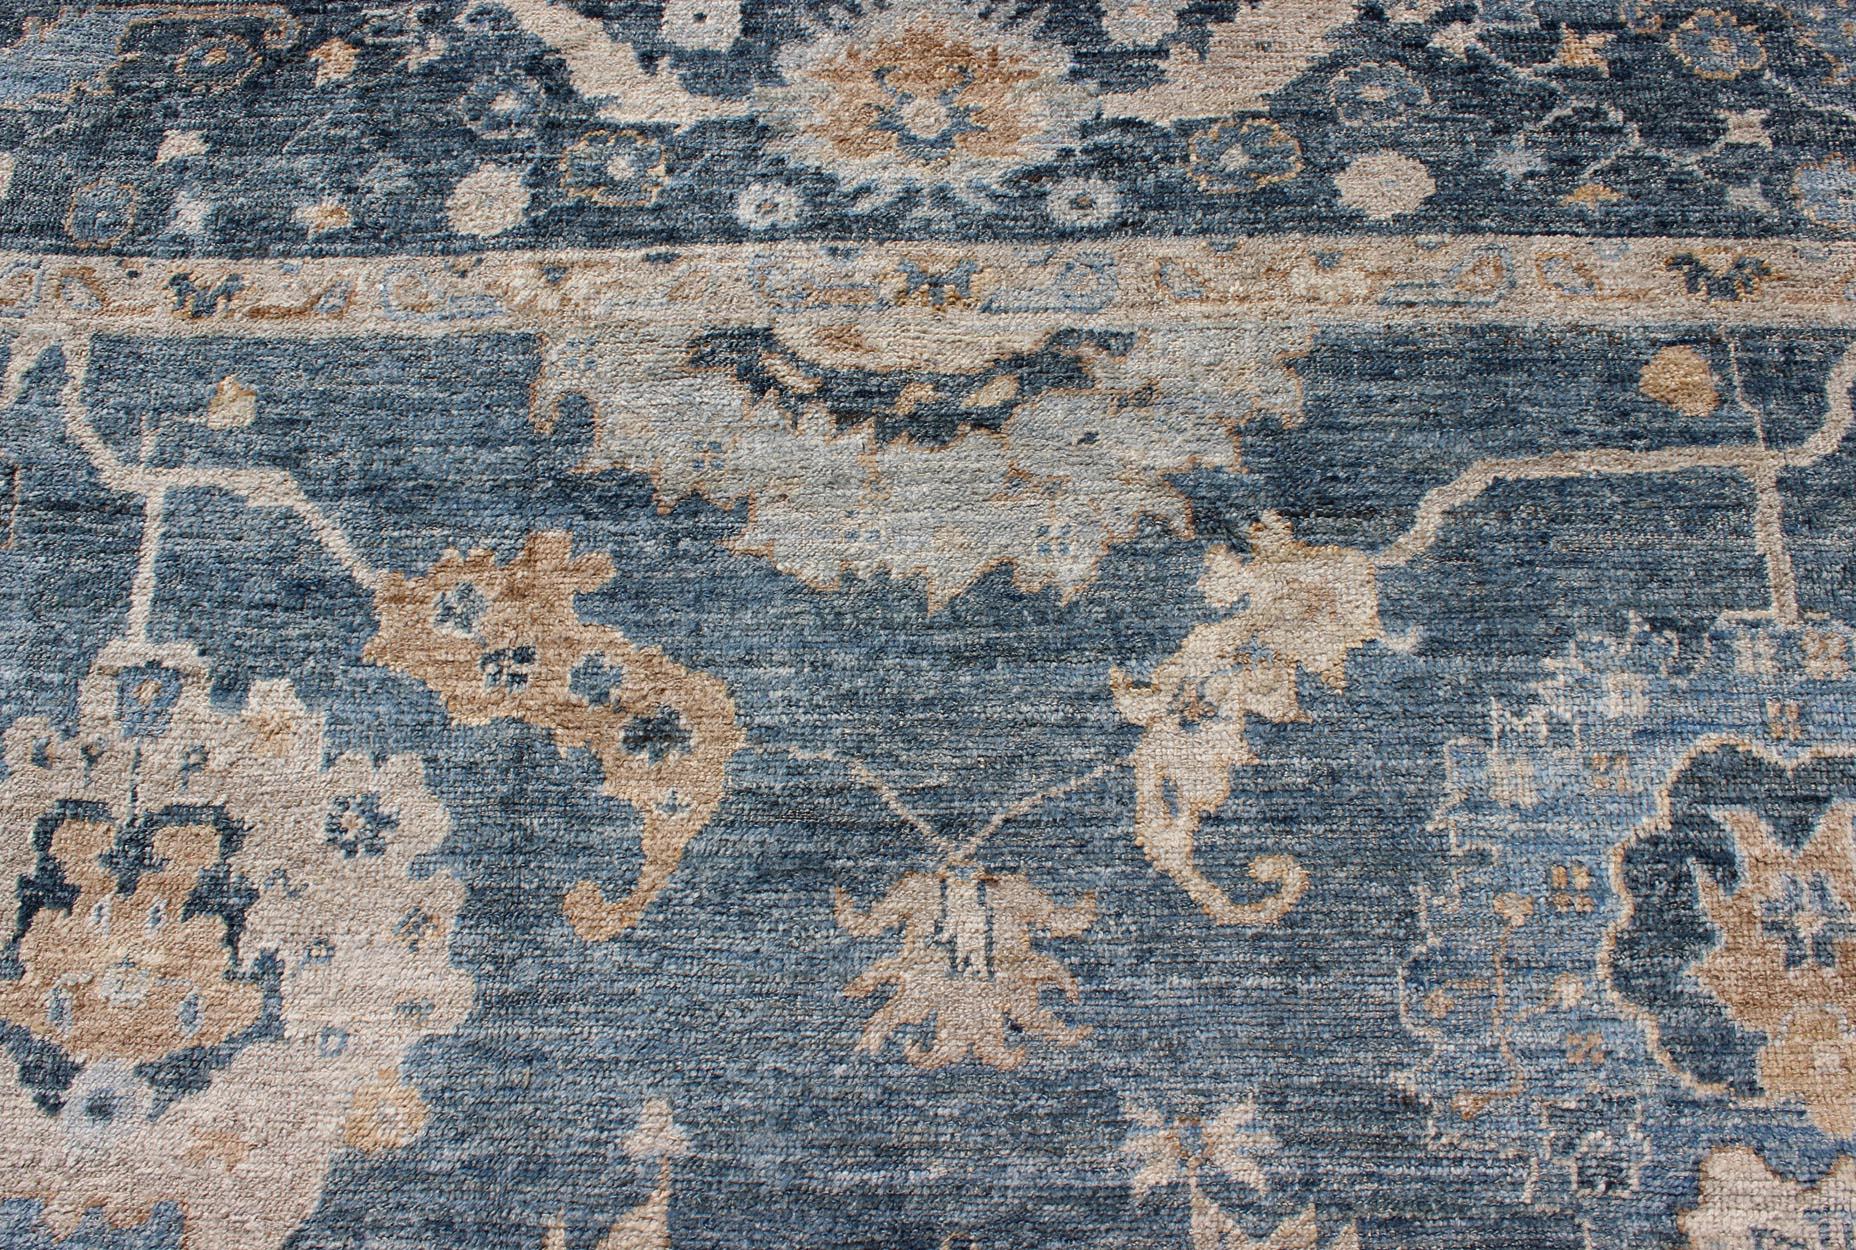 Angora Turkish Oushak Rug in Shades of Blue and Tan 1